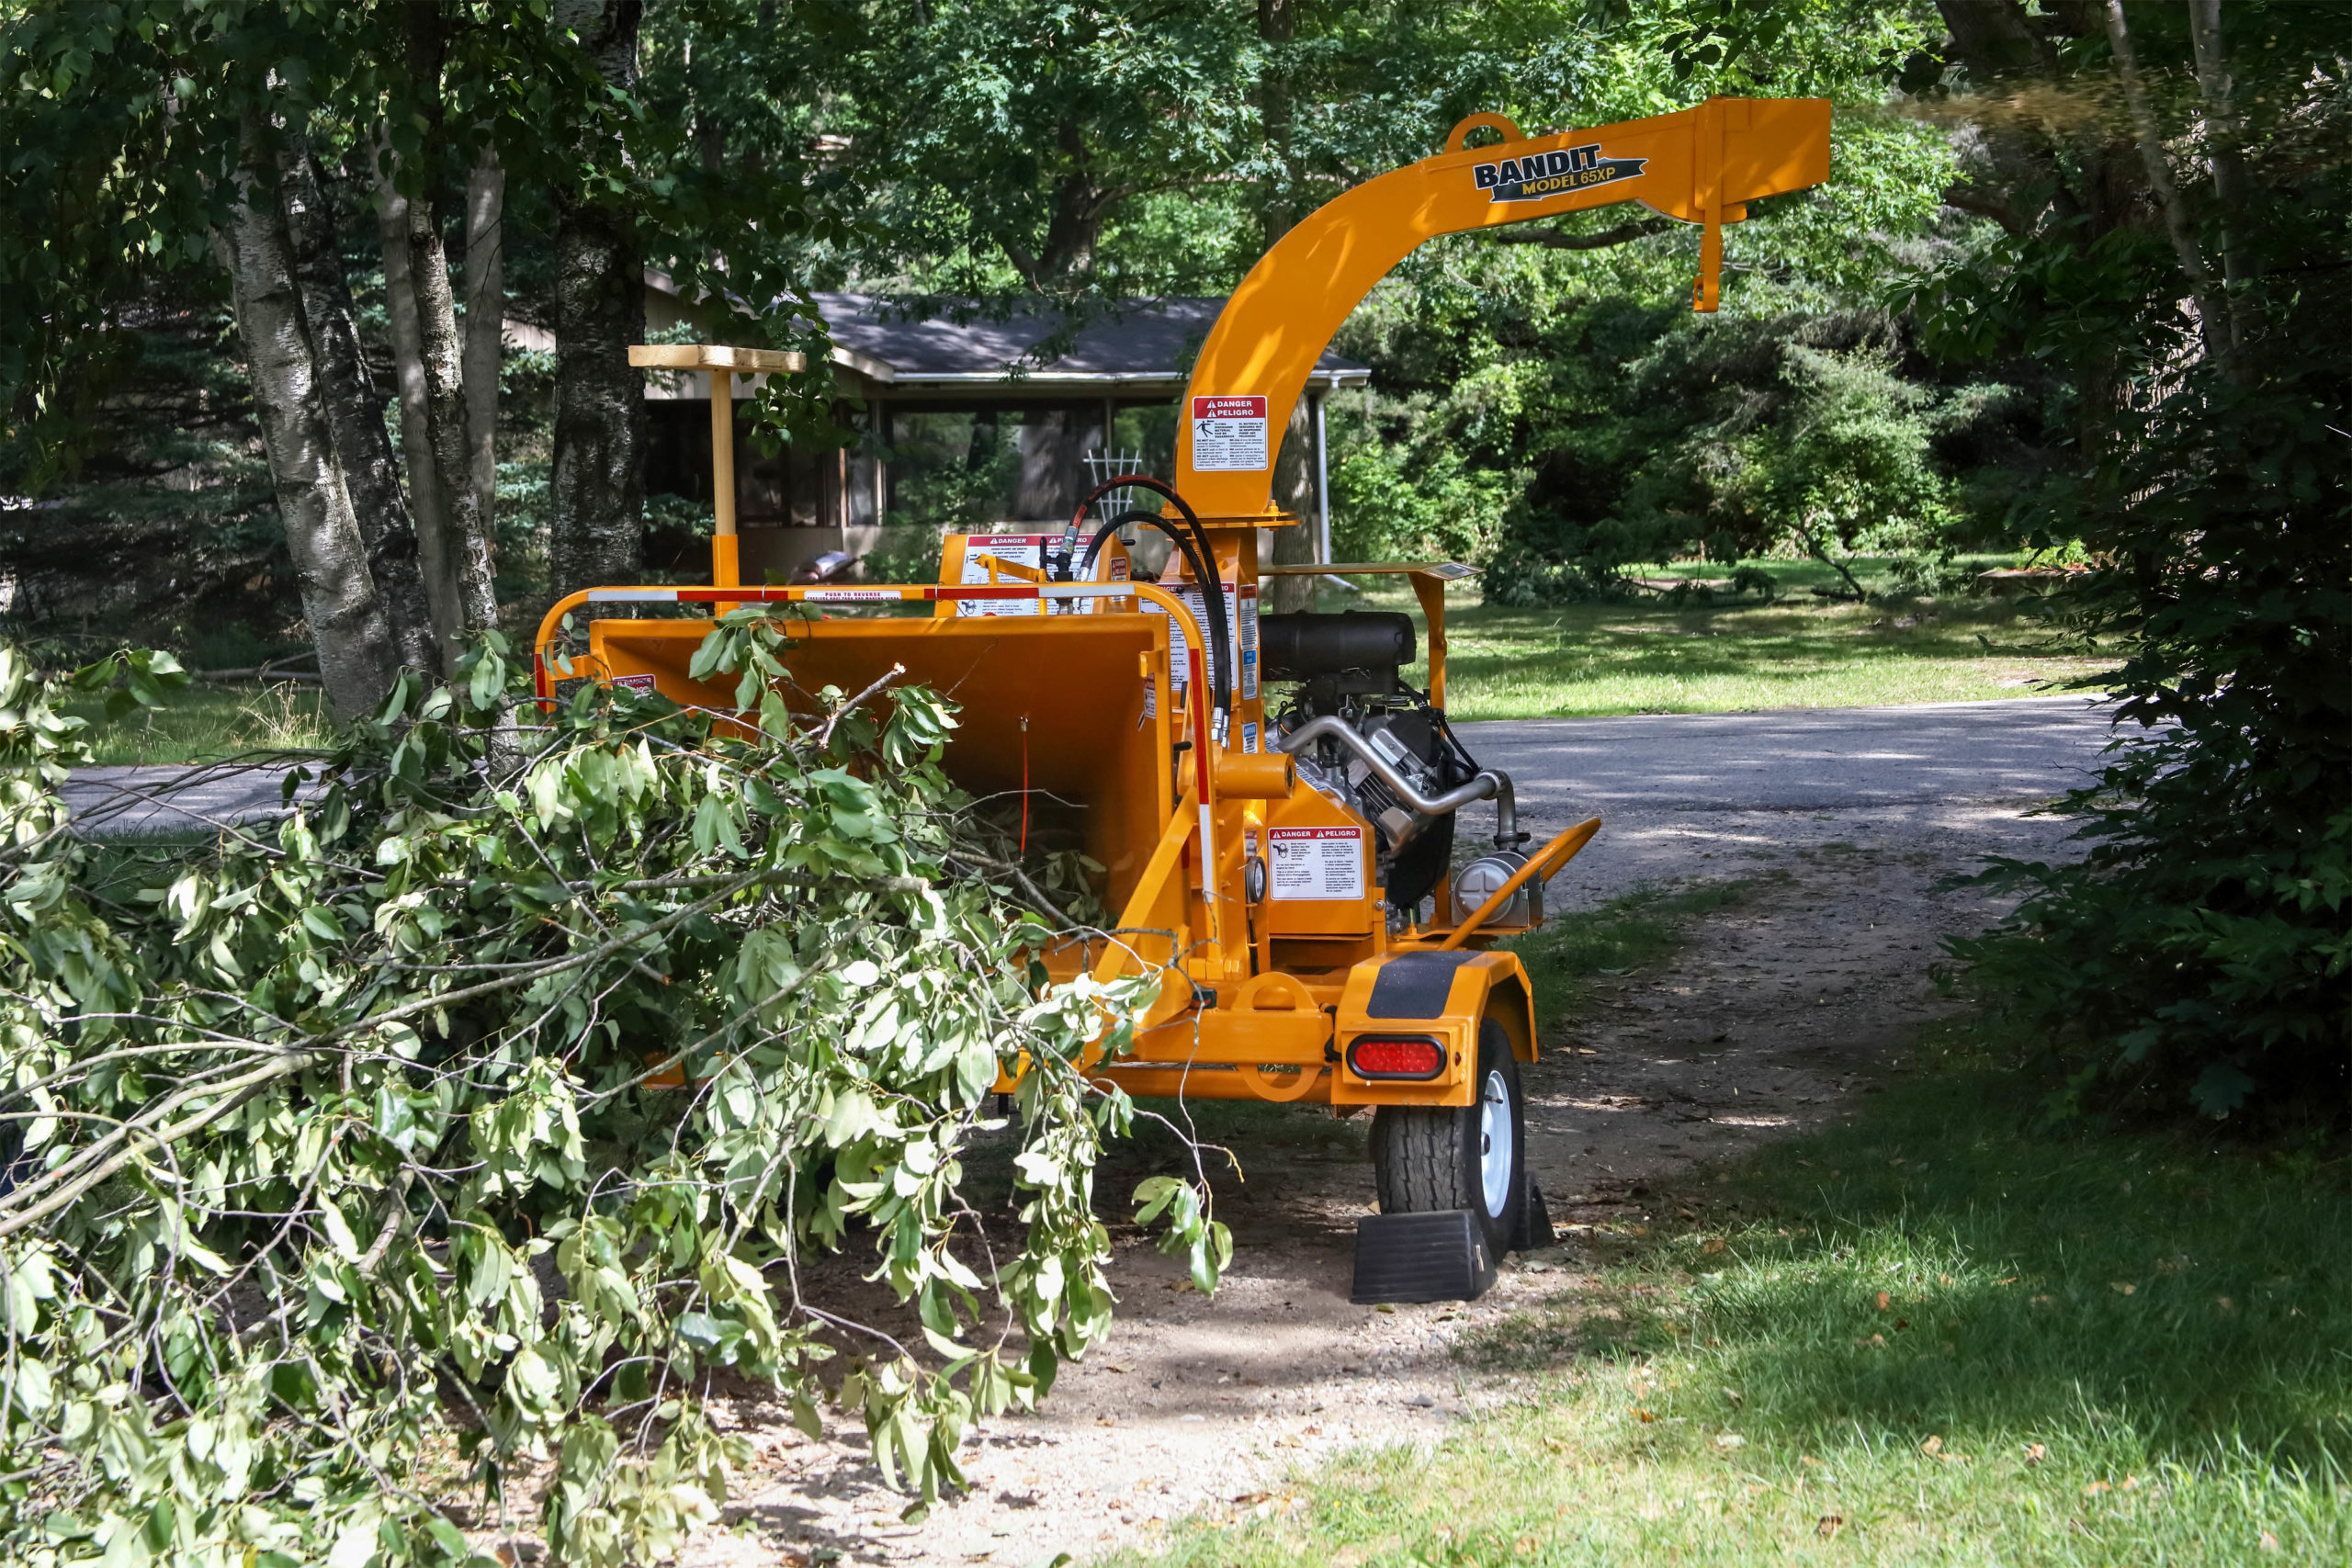 Bandit Hand-Fed Wood Chipper 65XP Iron Source in Delaware